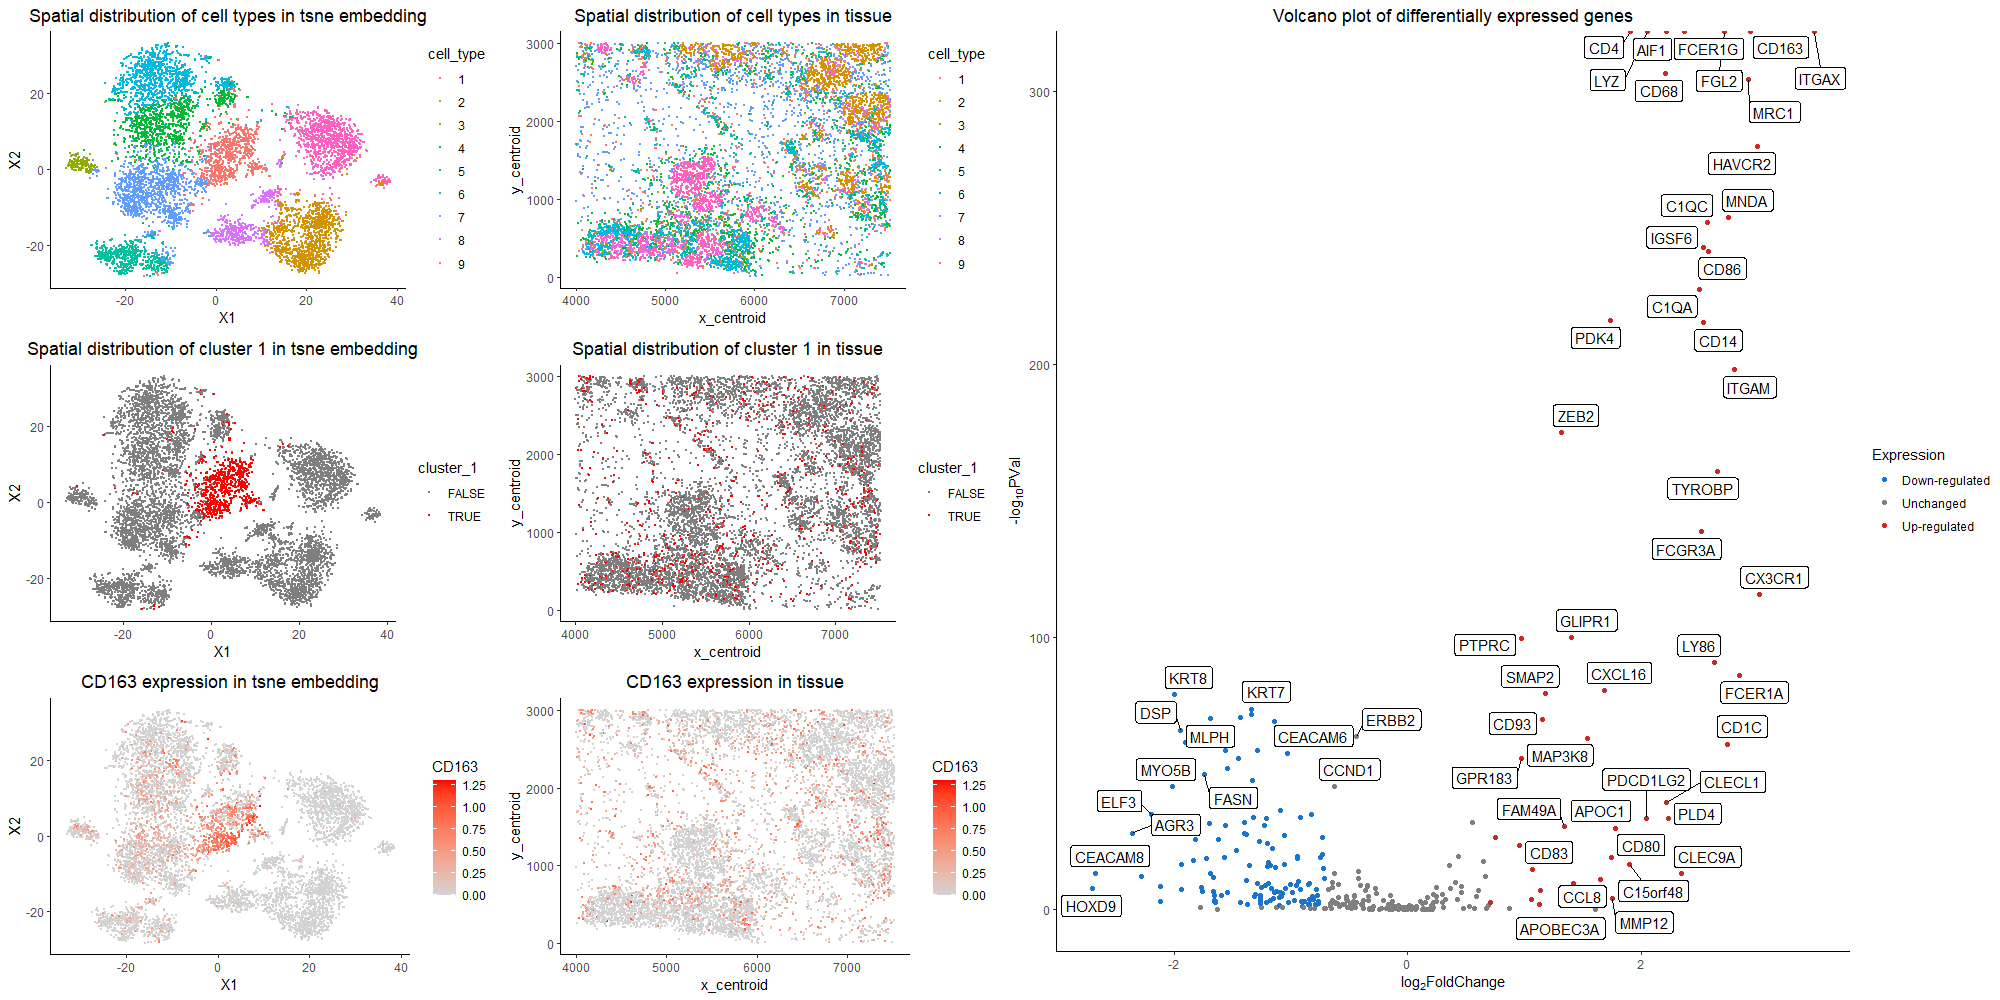 Validation of cell type clustering via differential gene expression